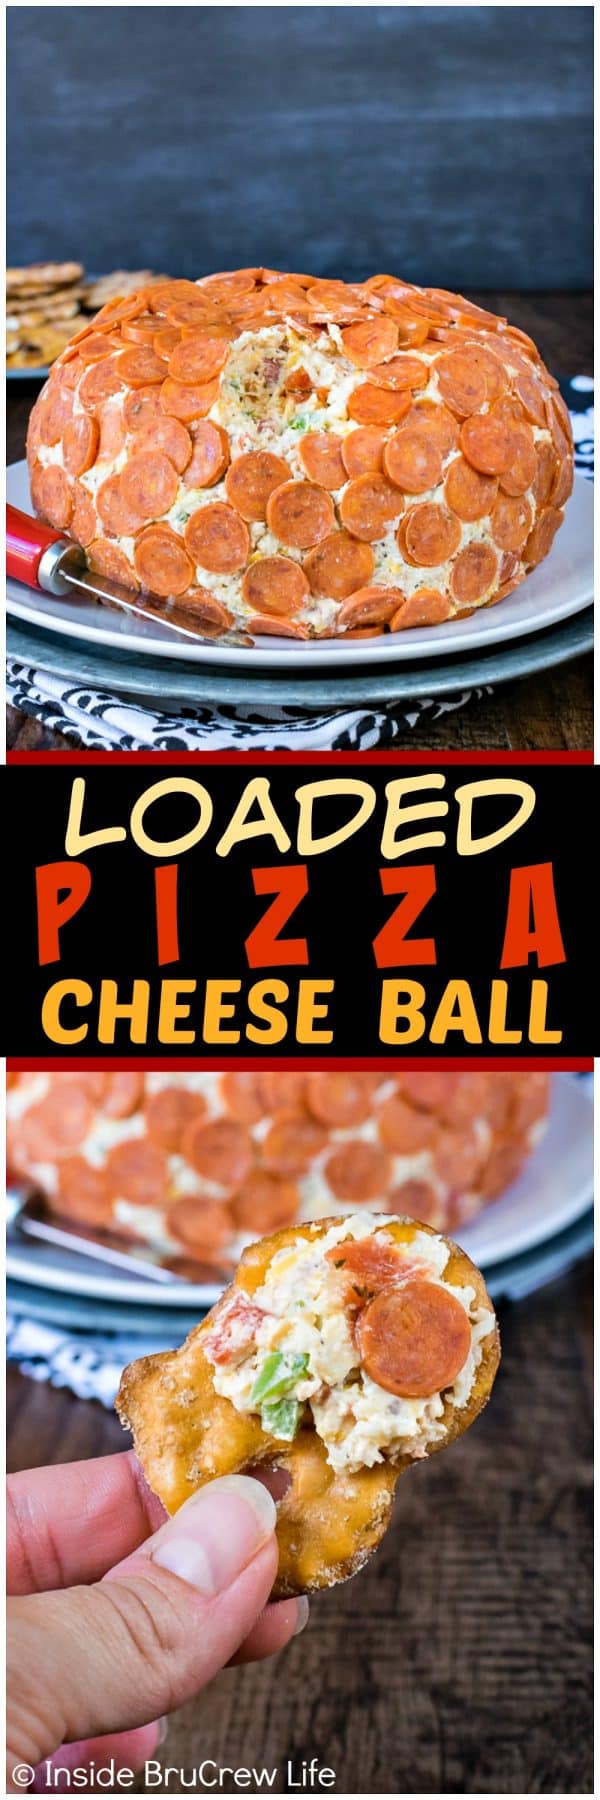 2 pictures of a loaded pizza cheese ball separated by a text box.